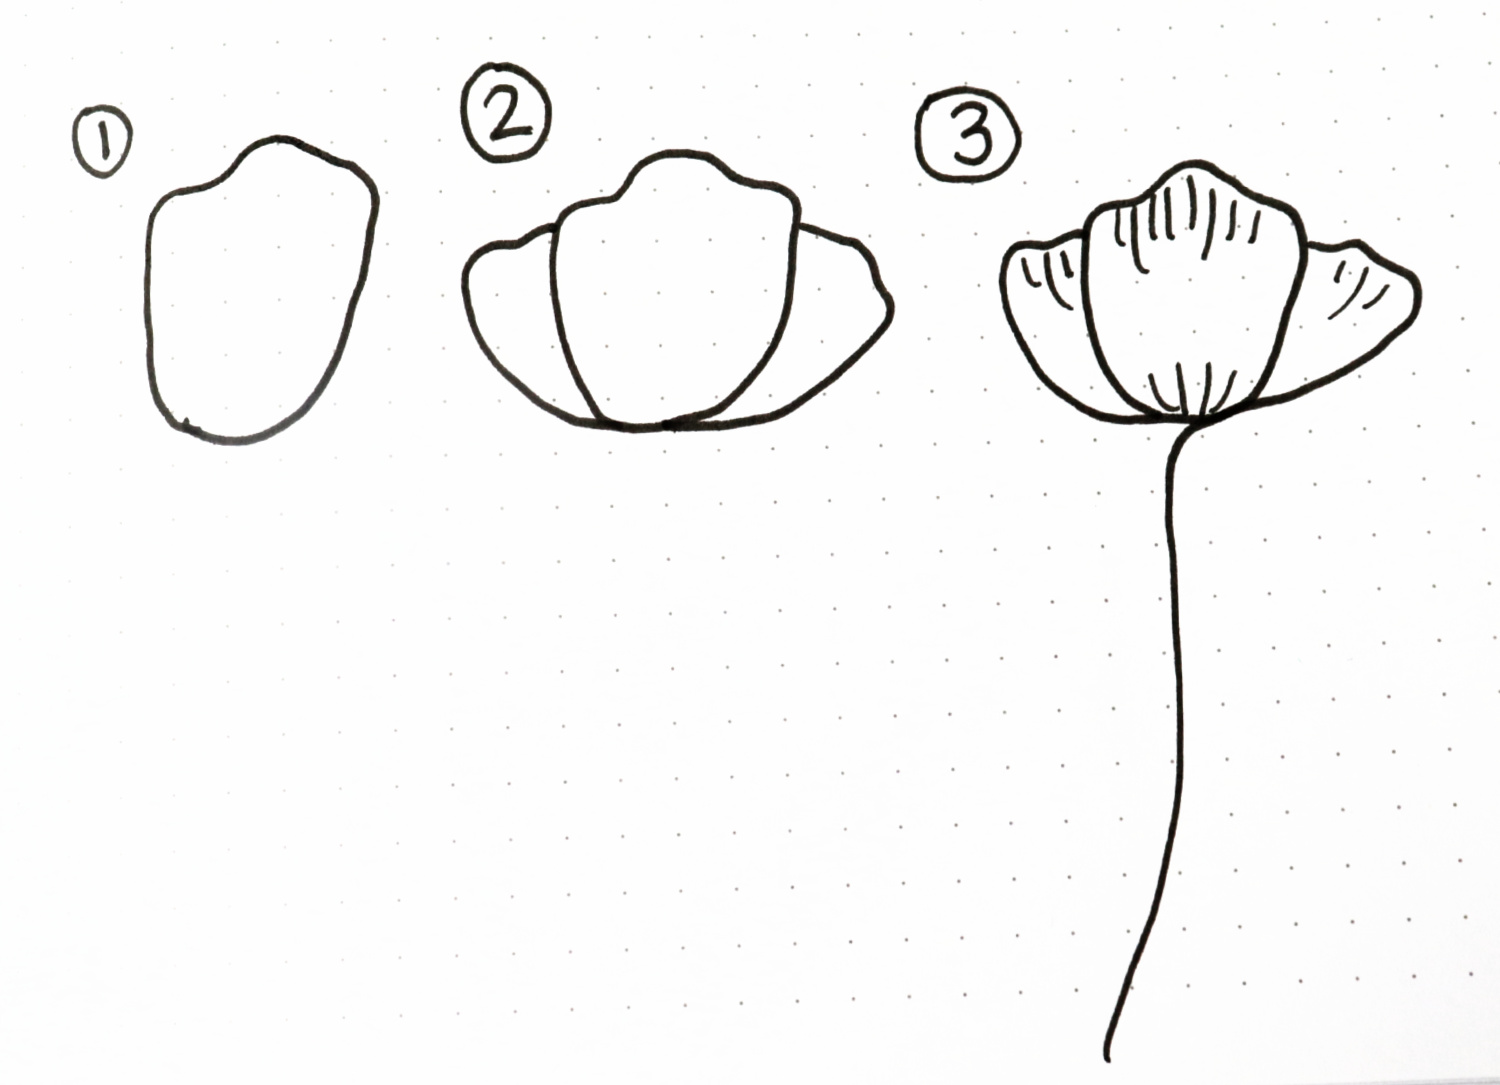 Image is a diagram of the three steps to drawing a large-petaled flower as explained in the written tutorial.